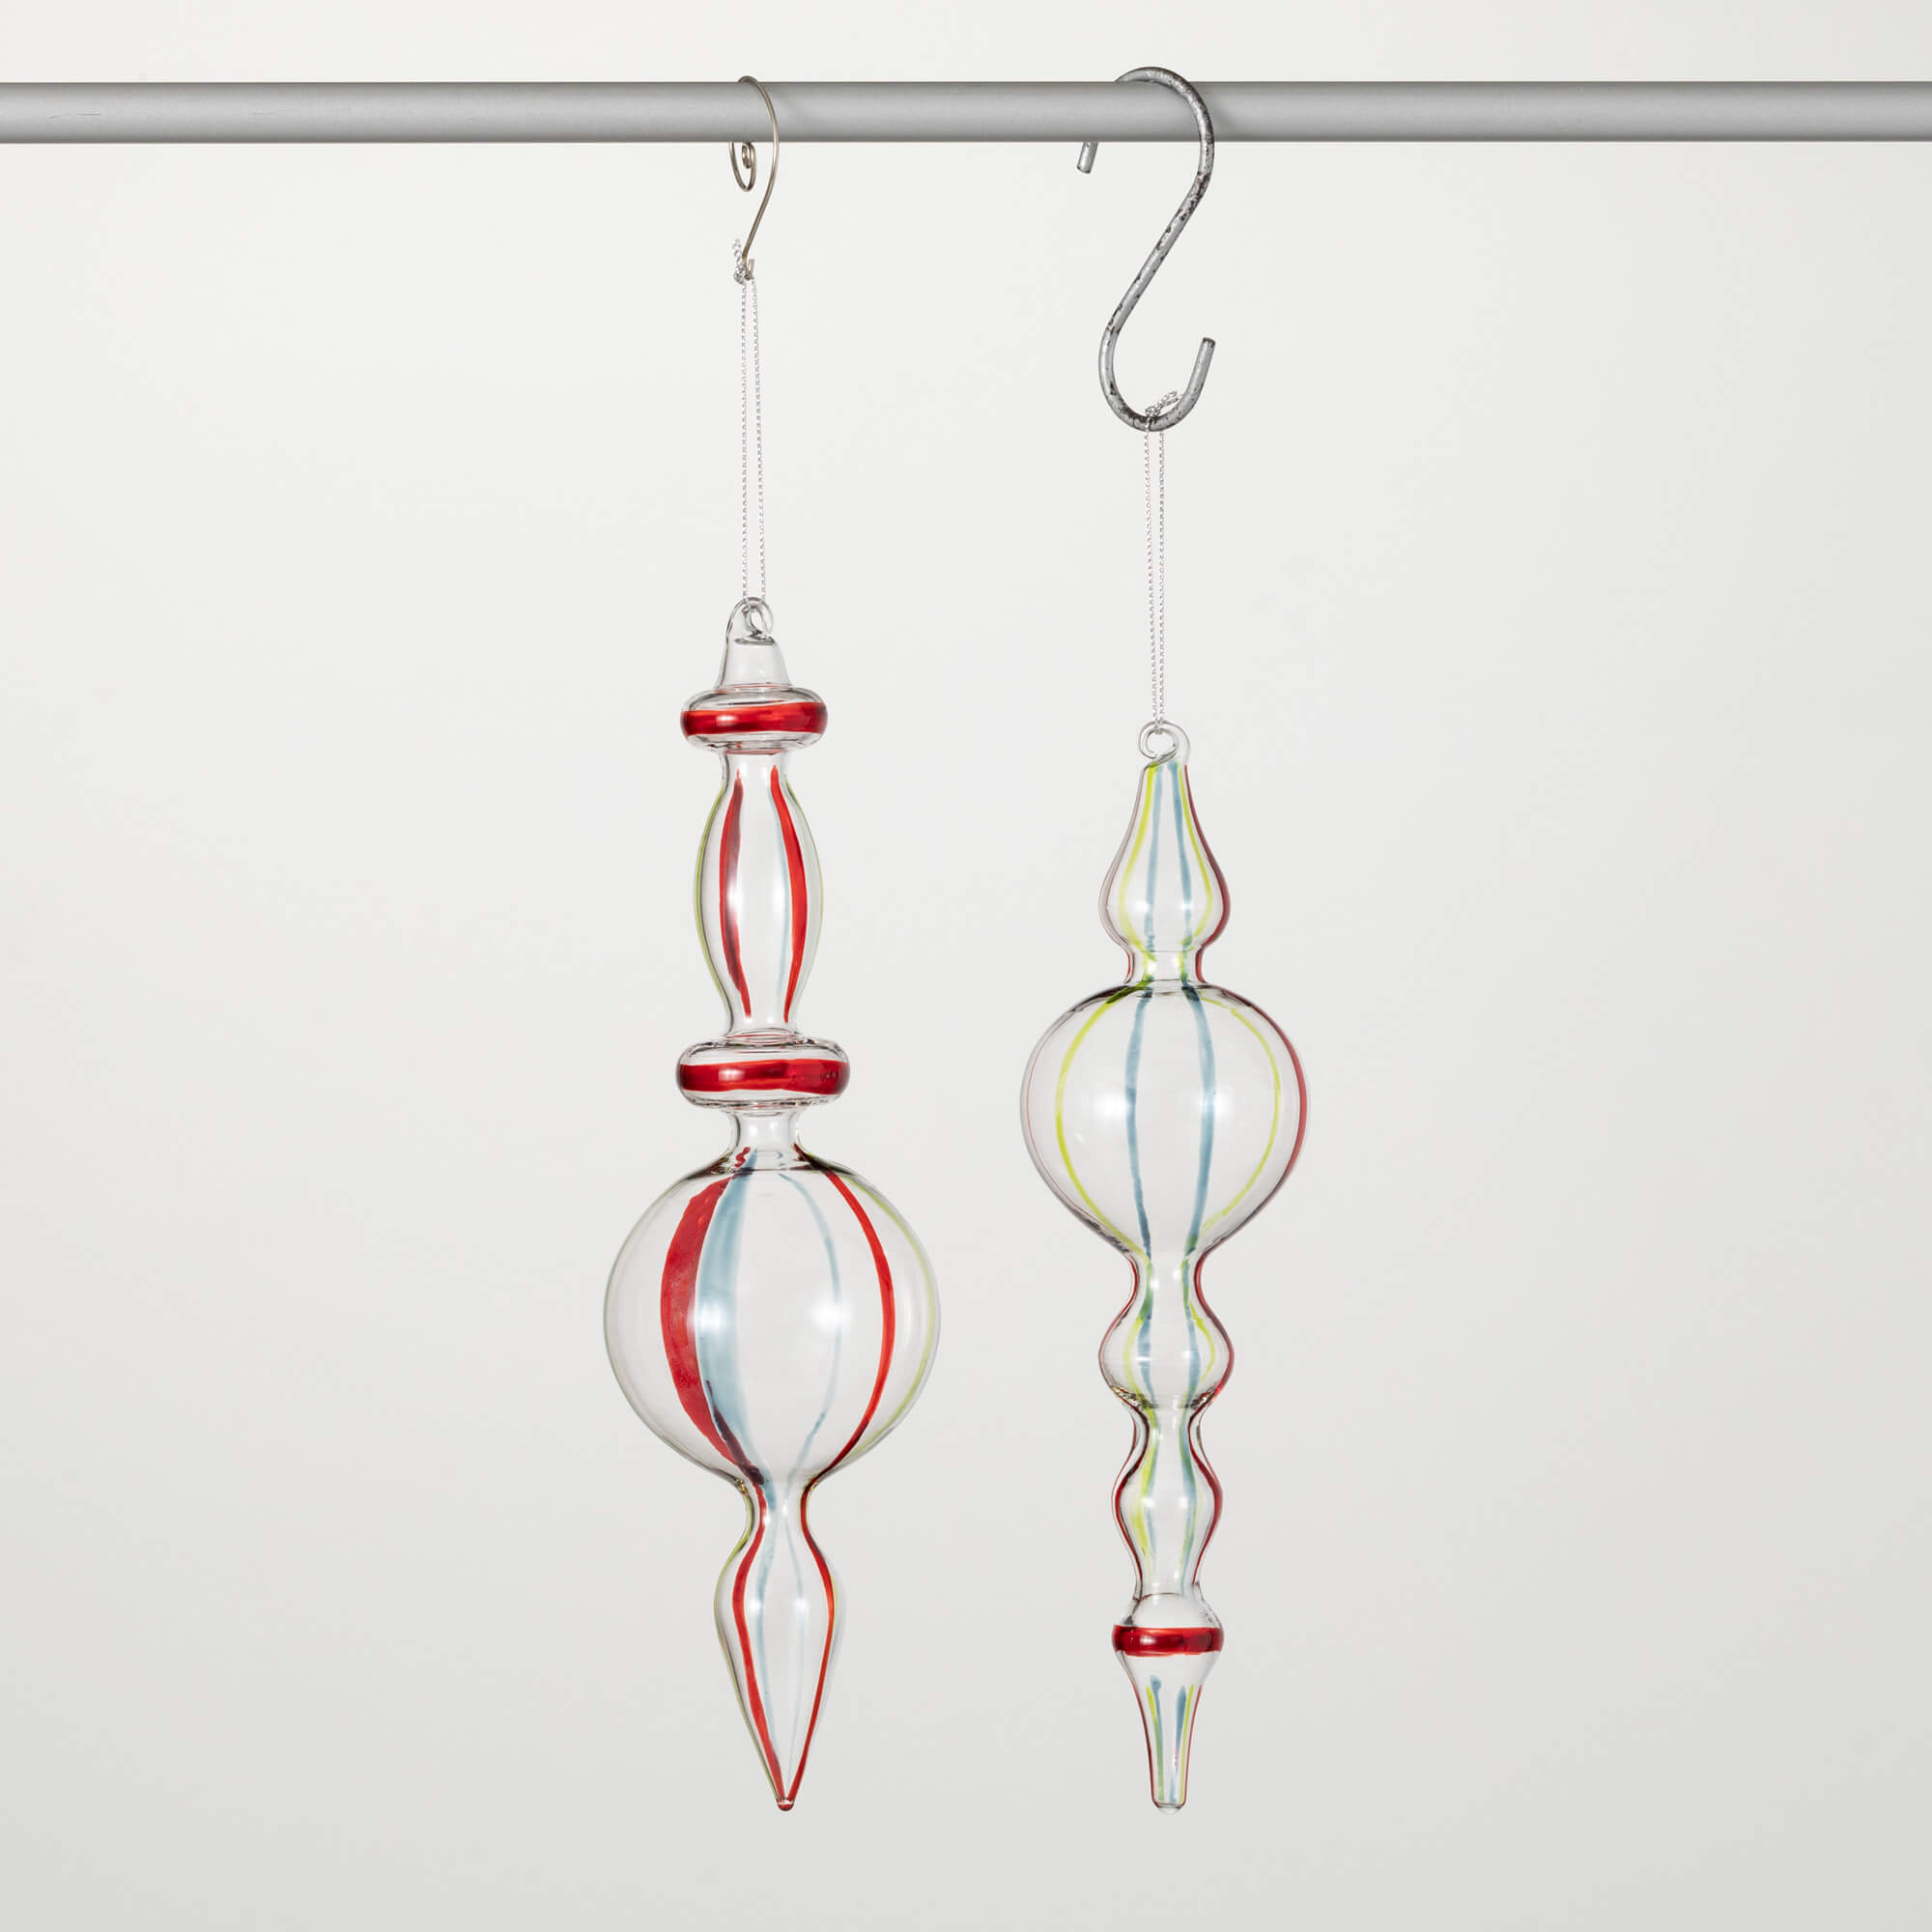 CLEAR STRIPED FINIAL ORNAMENTS